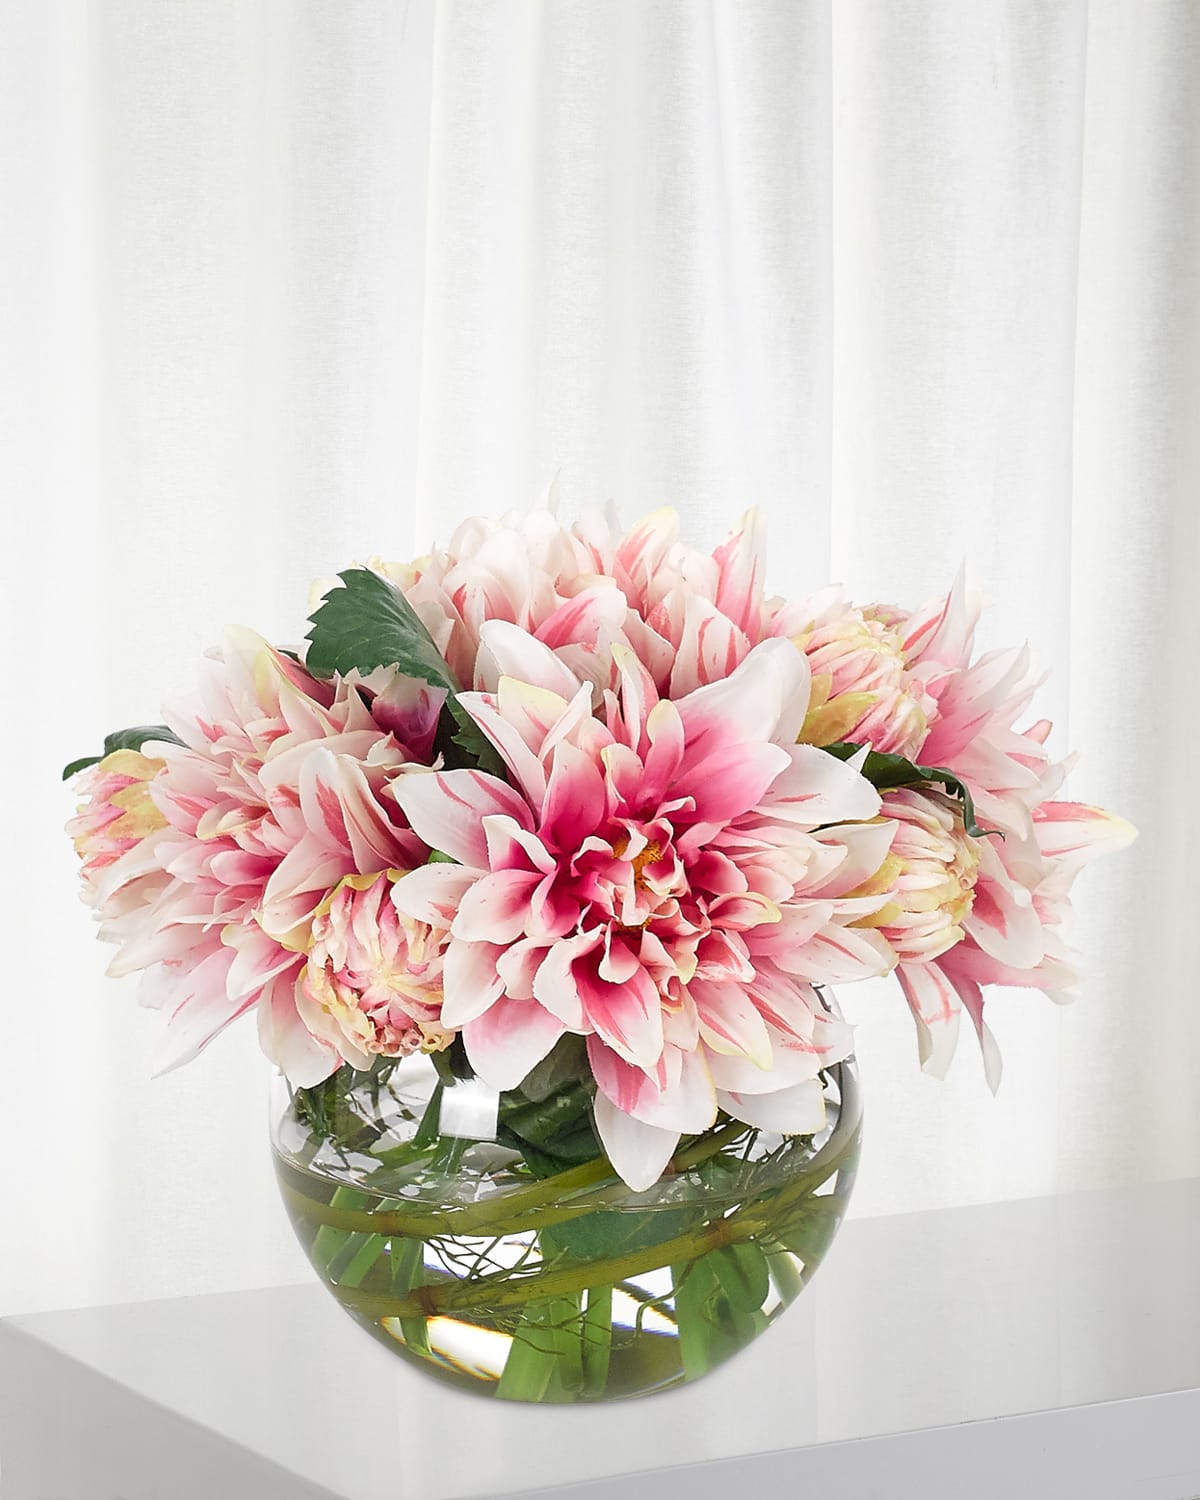 NDI Faux Anemone Snowball Floral Arrangement in Metal Planter | Horchow